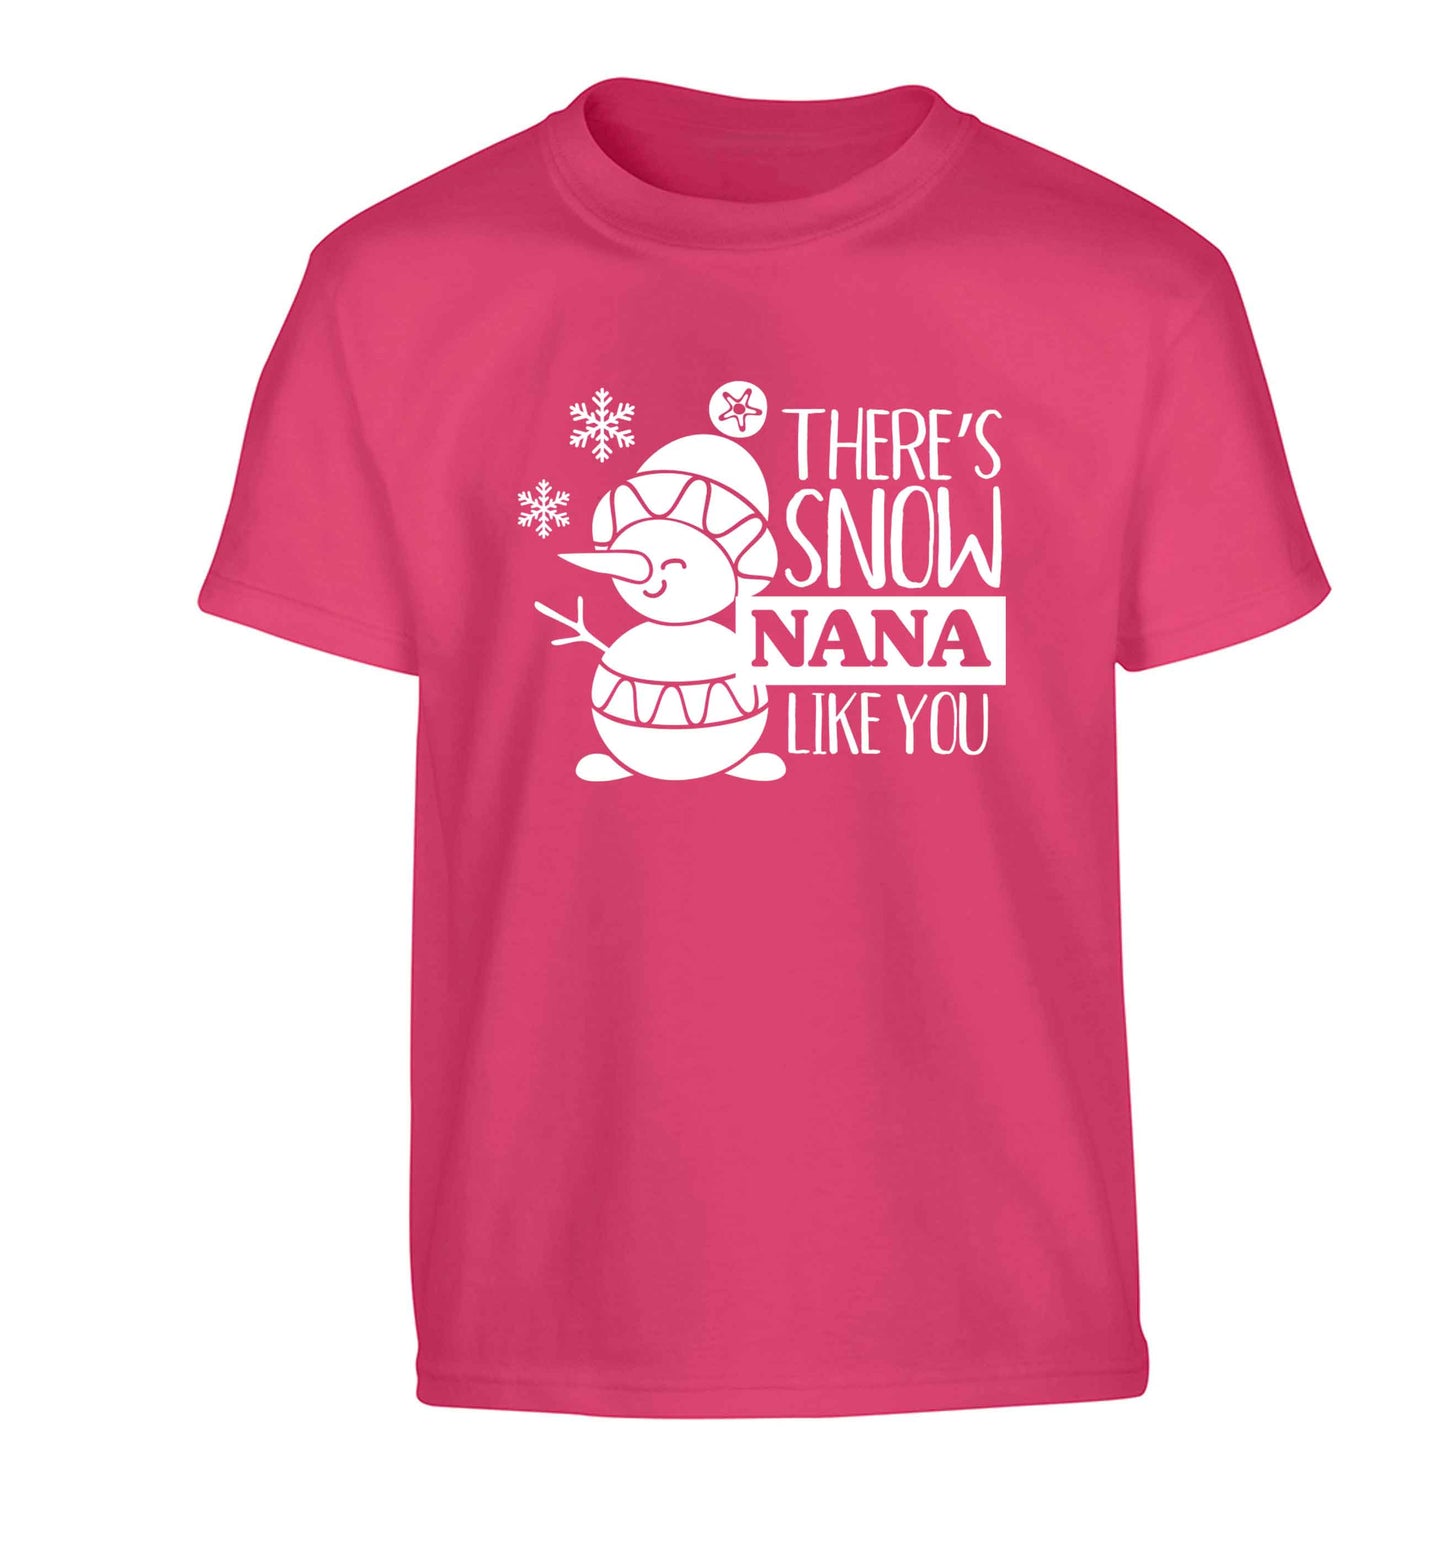 There's snow nana like you Children's pink Tshirt 12-13 Years